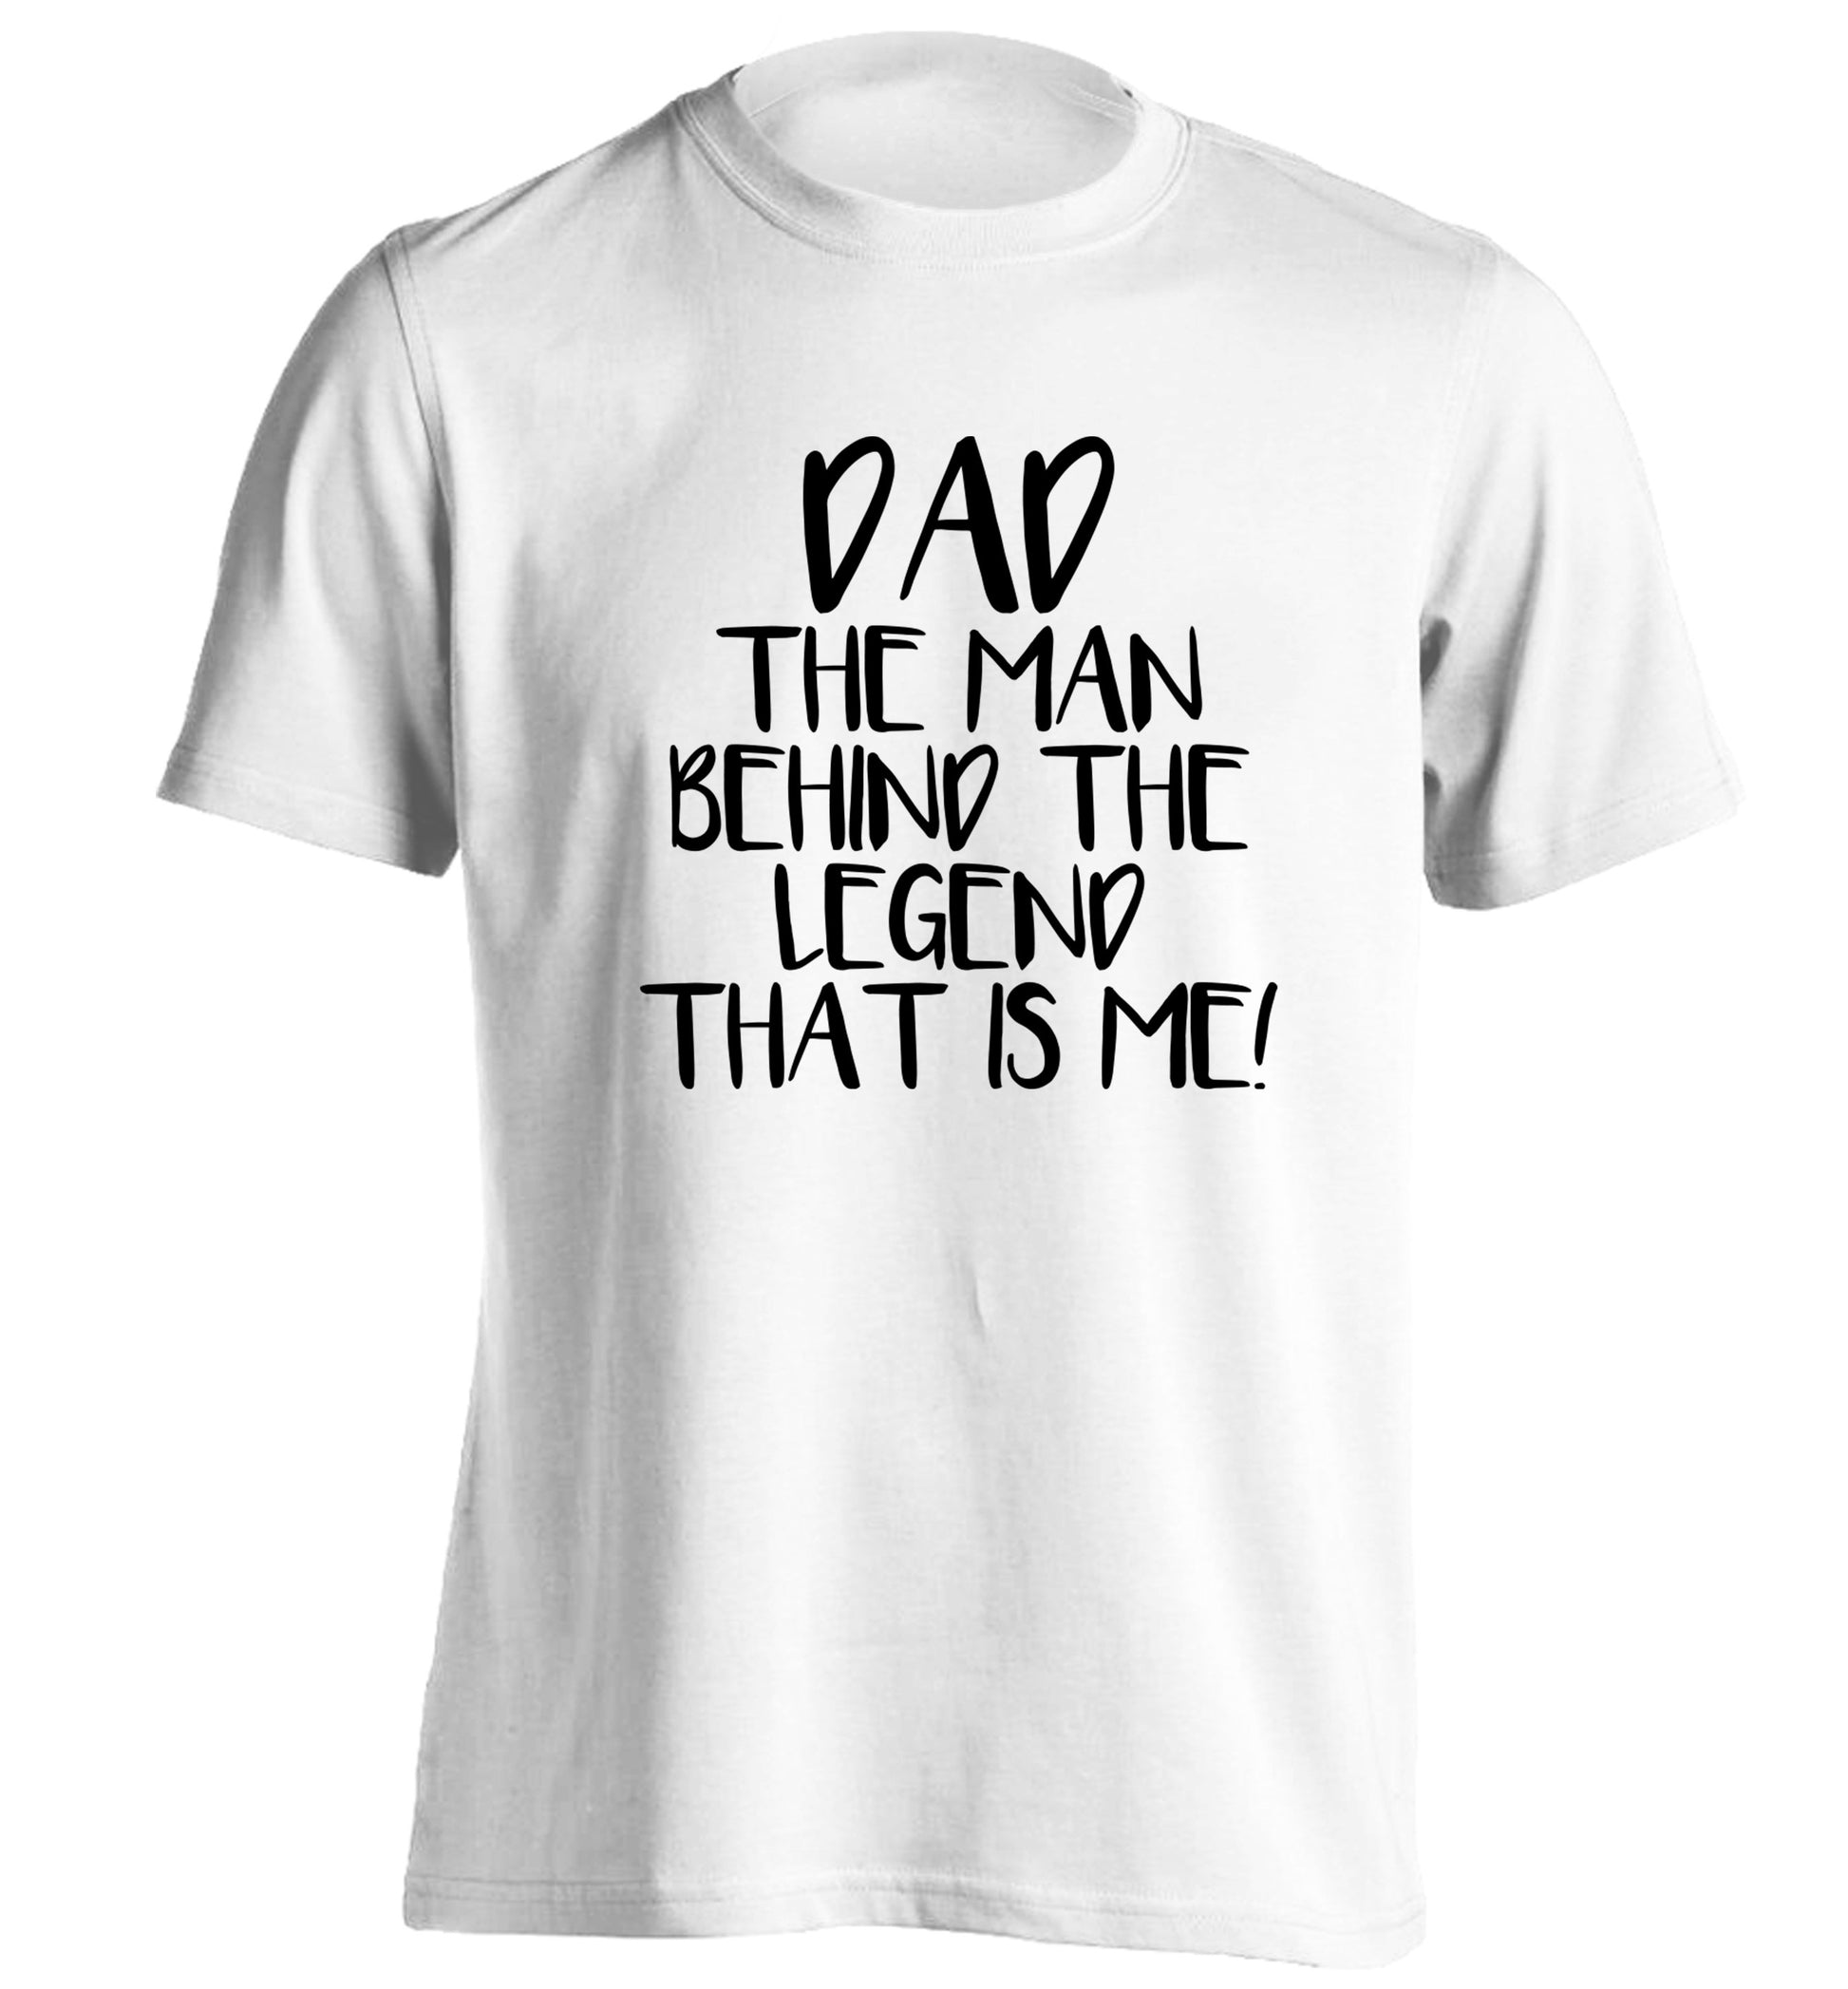 Dad the man behind the legend that is me! adults unisex white Tshirt 2XL